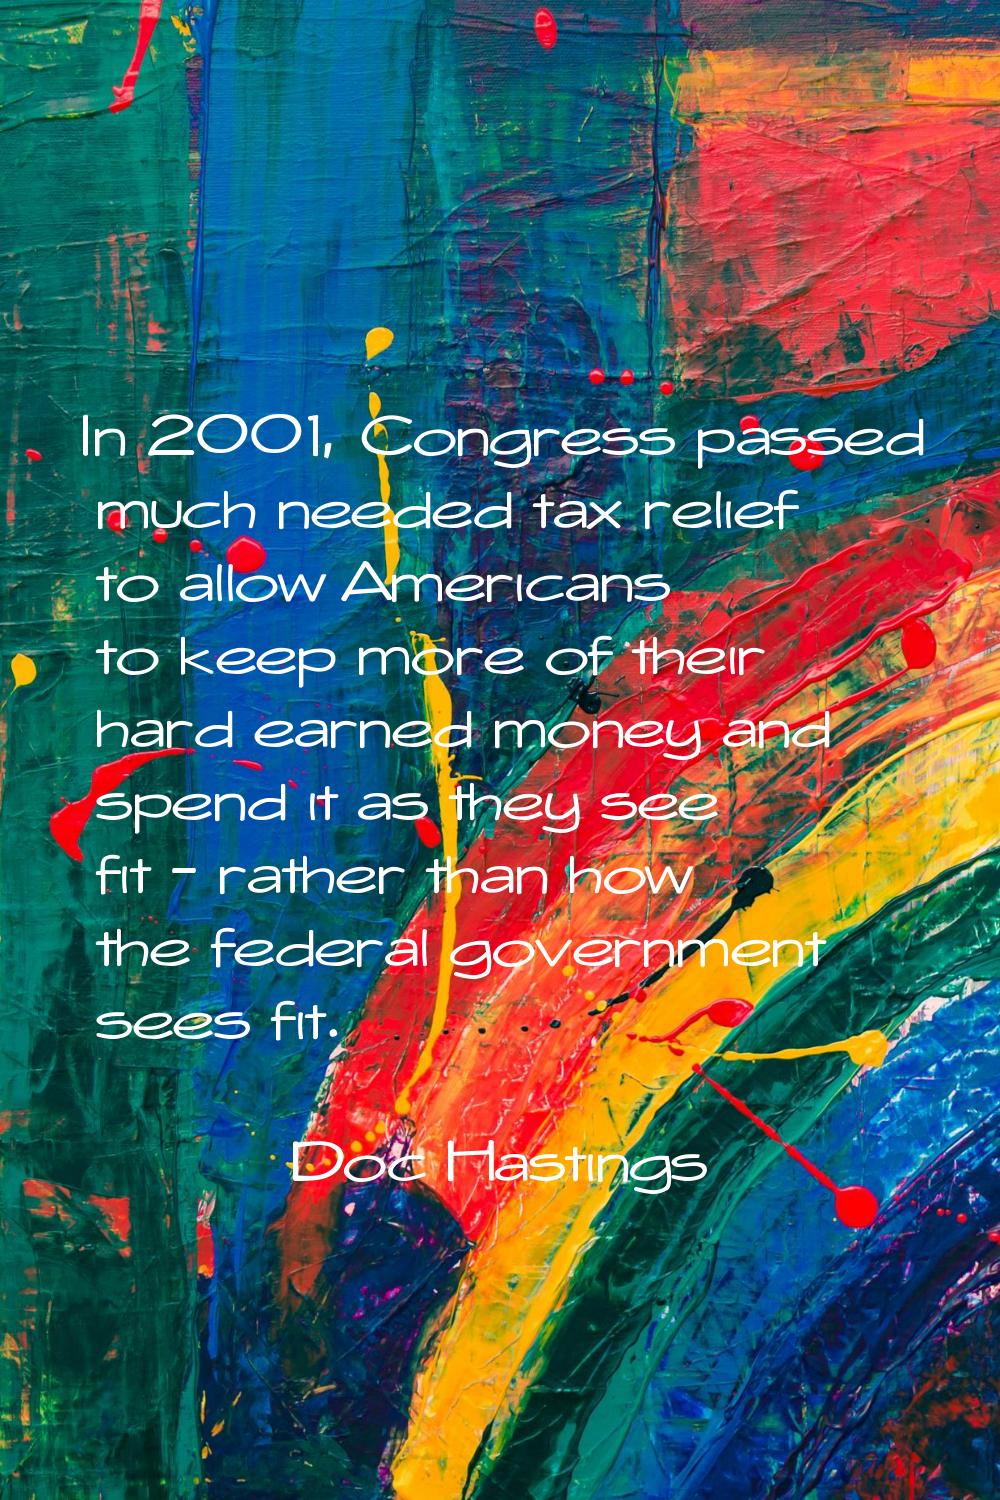 In 2001, Congress passed much needed tax relief to allow Americans to keep more of their hard earne